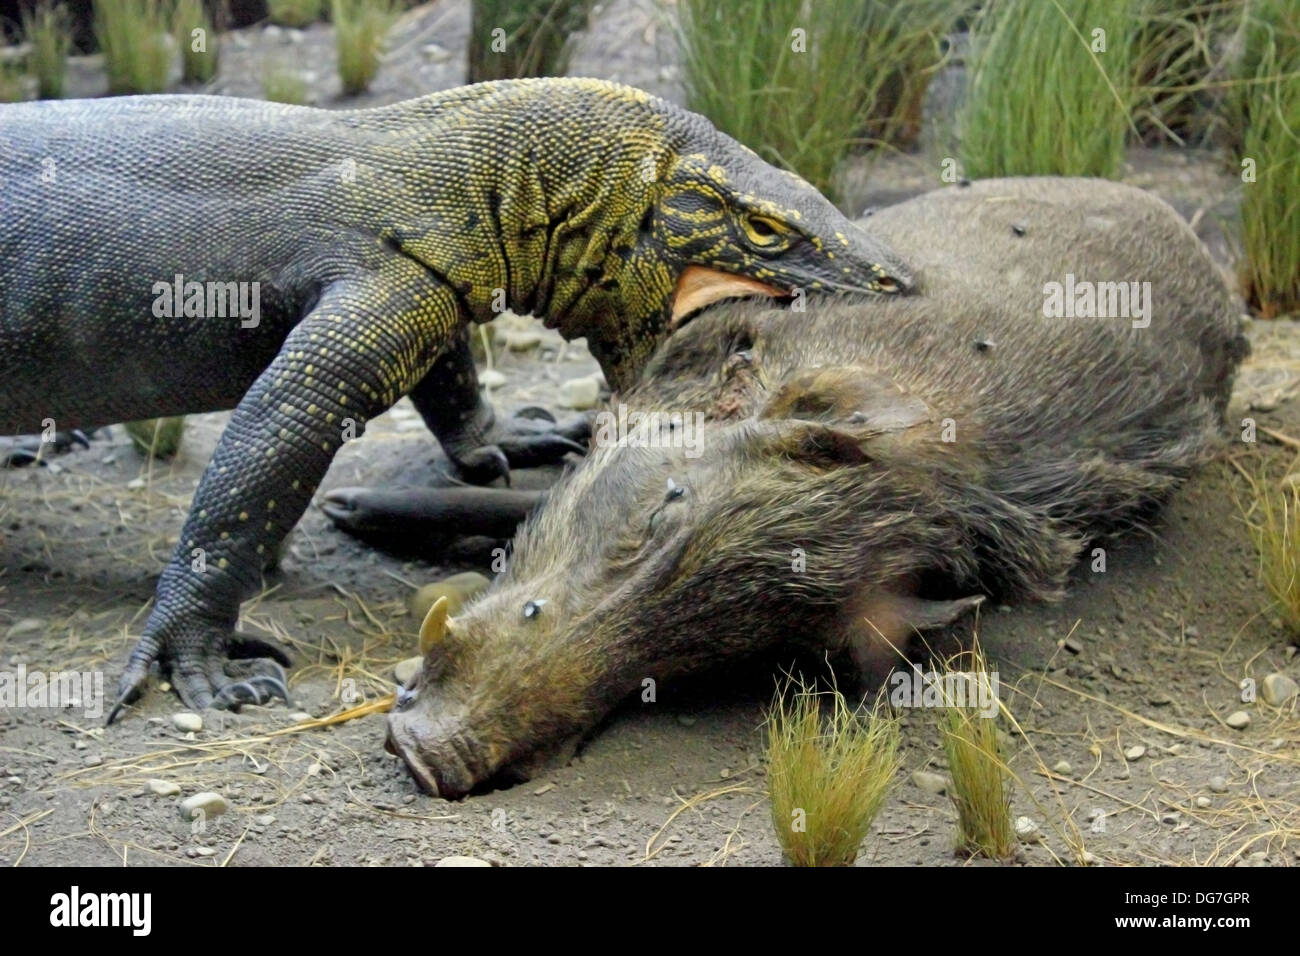 A display of a Komodo Dragon feeding on a wild hog at the American Museum of Natural History in New York City. Stock Photo